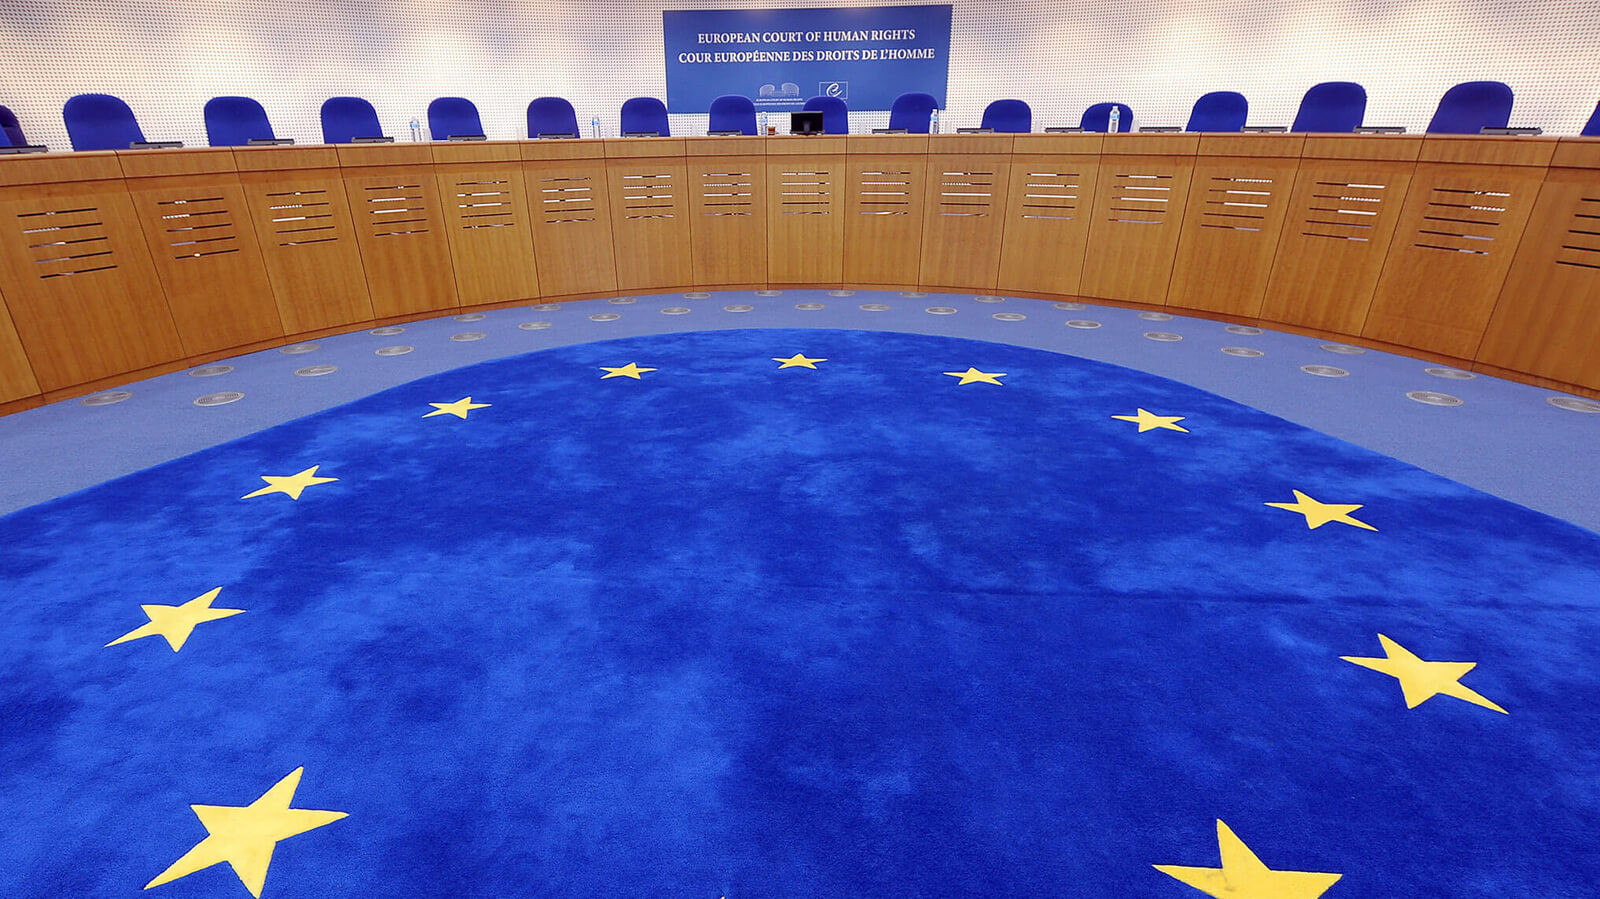 The European Court of Human Rights has suspended consideration of complaints against Russia